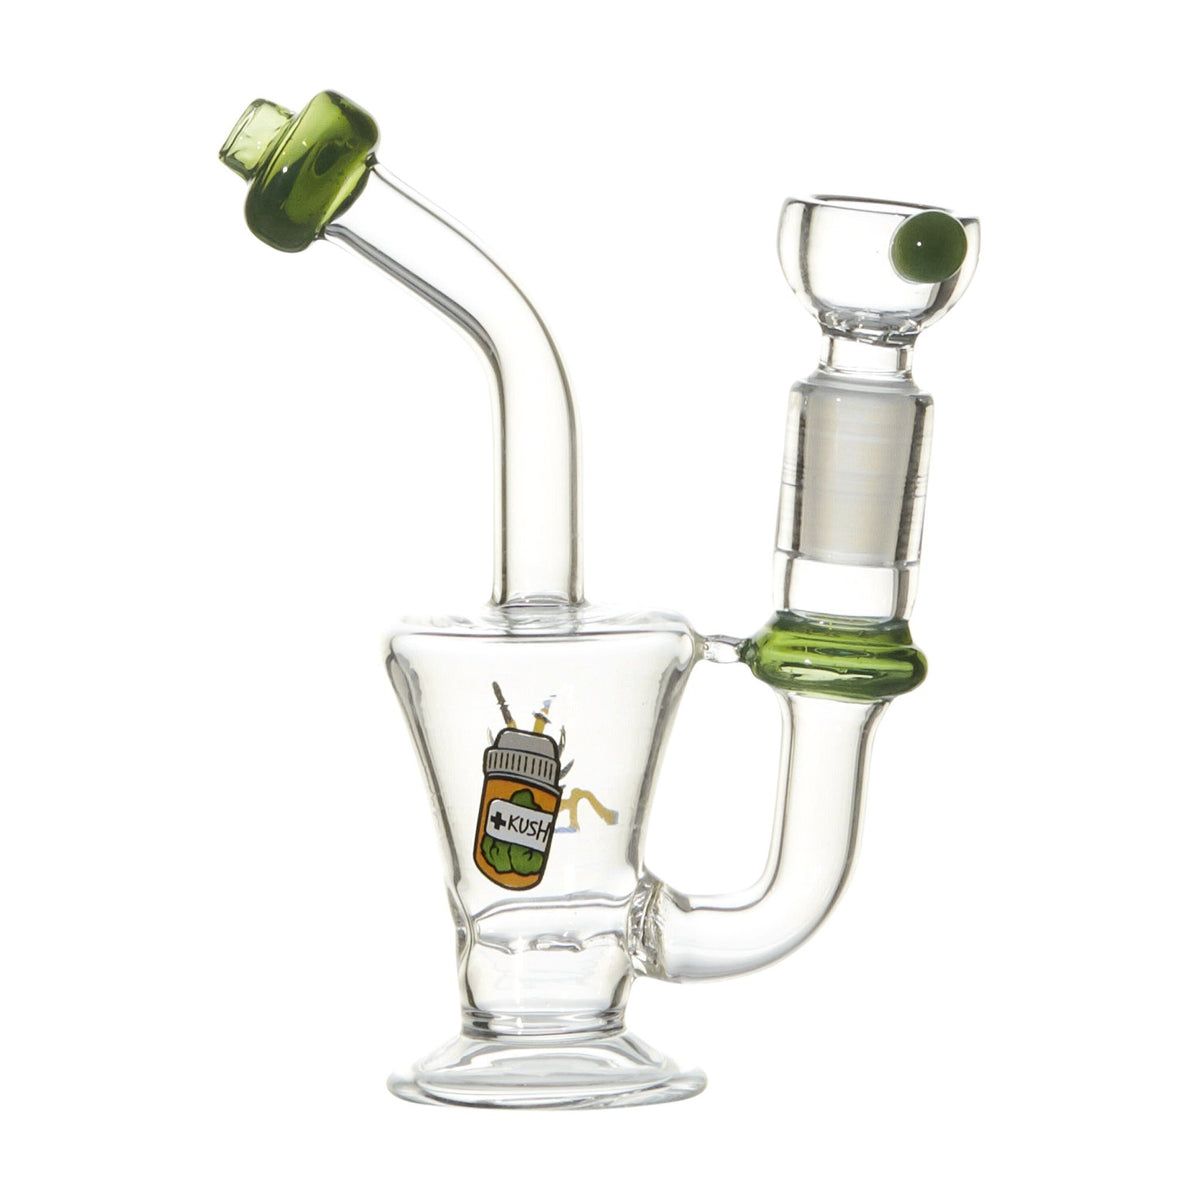 Dr. Kush Mini Bong - 5in - Everything For 420